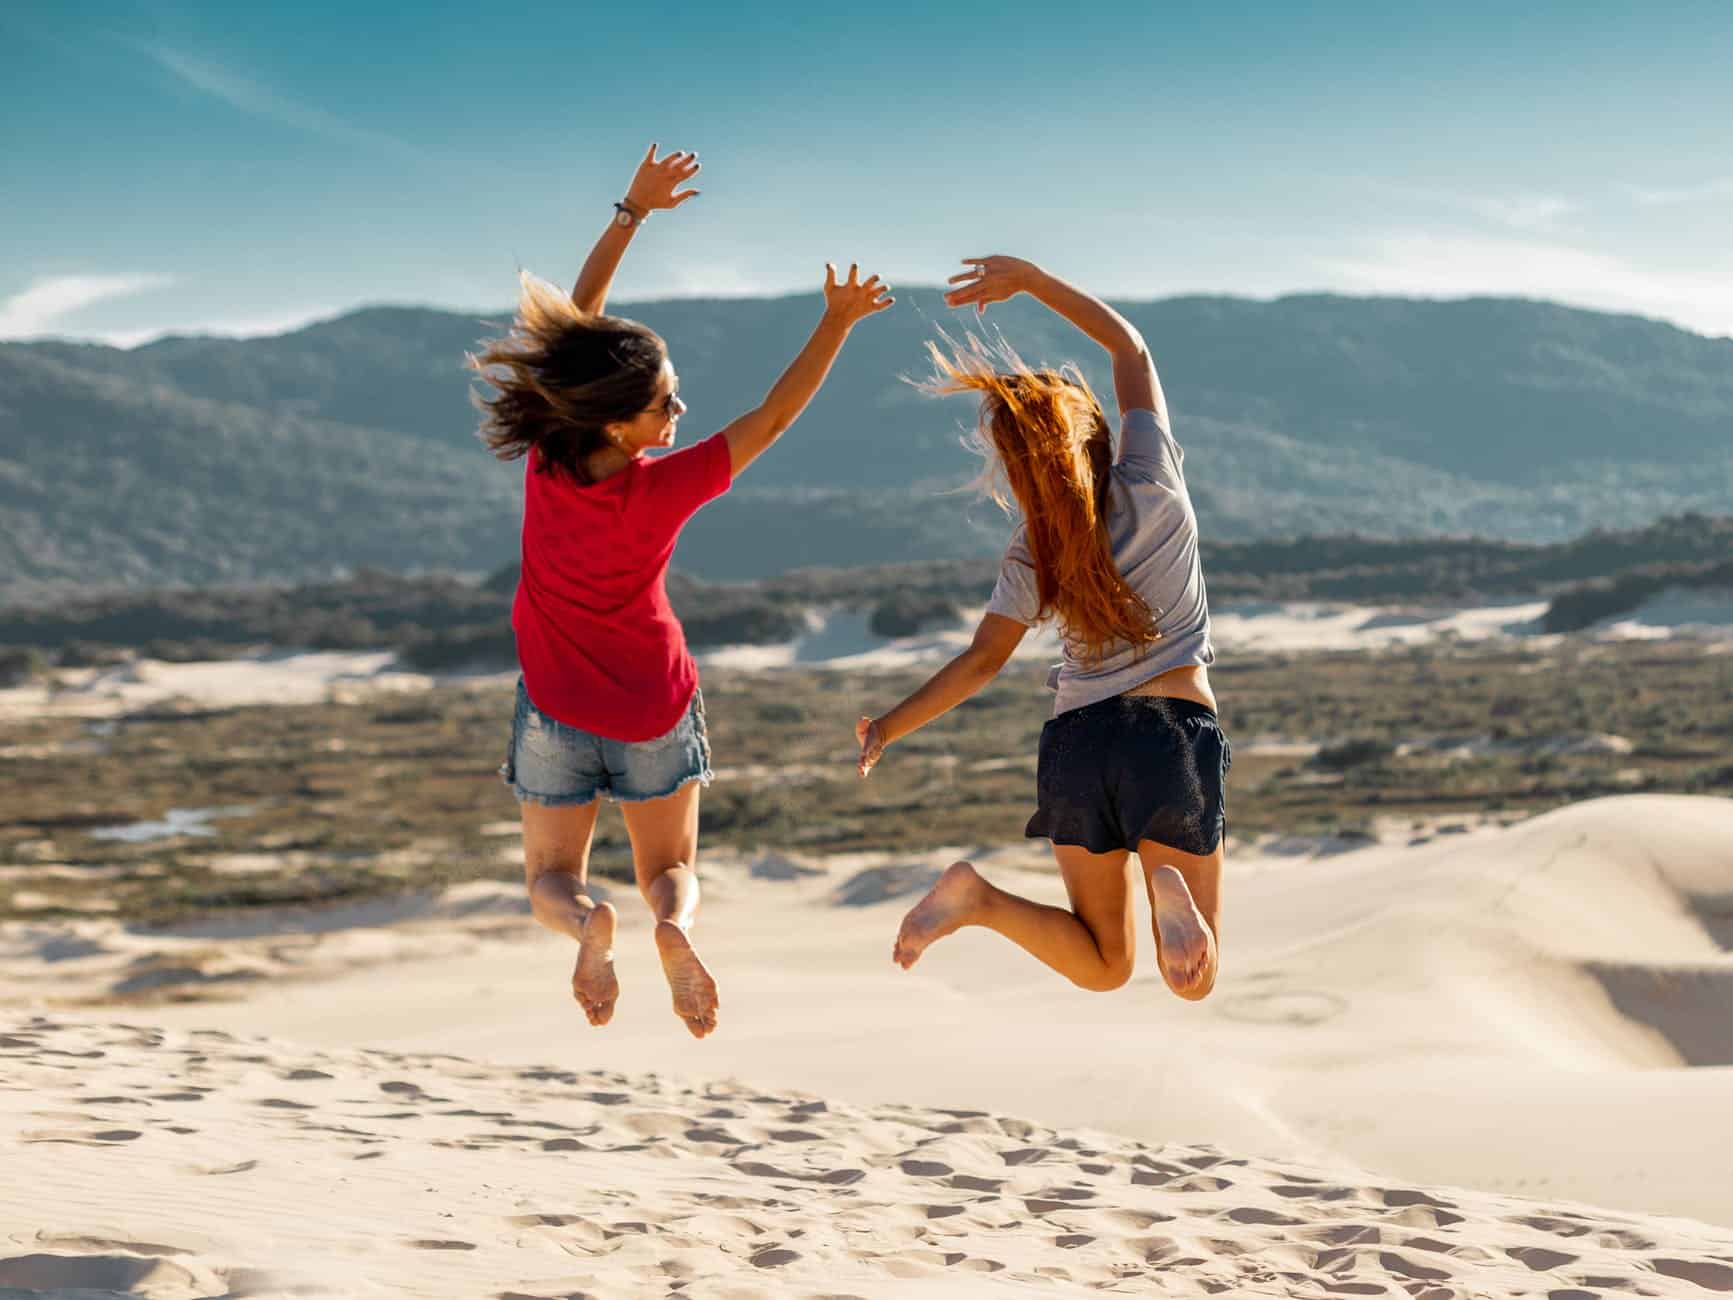 Two young people jumping on the sand with mountains in the background